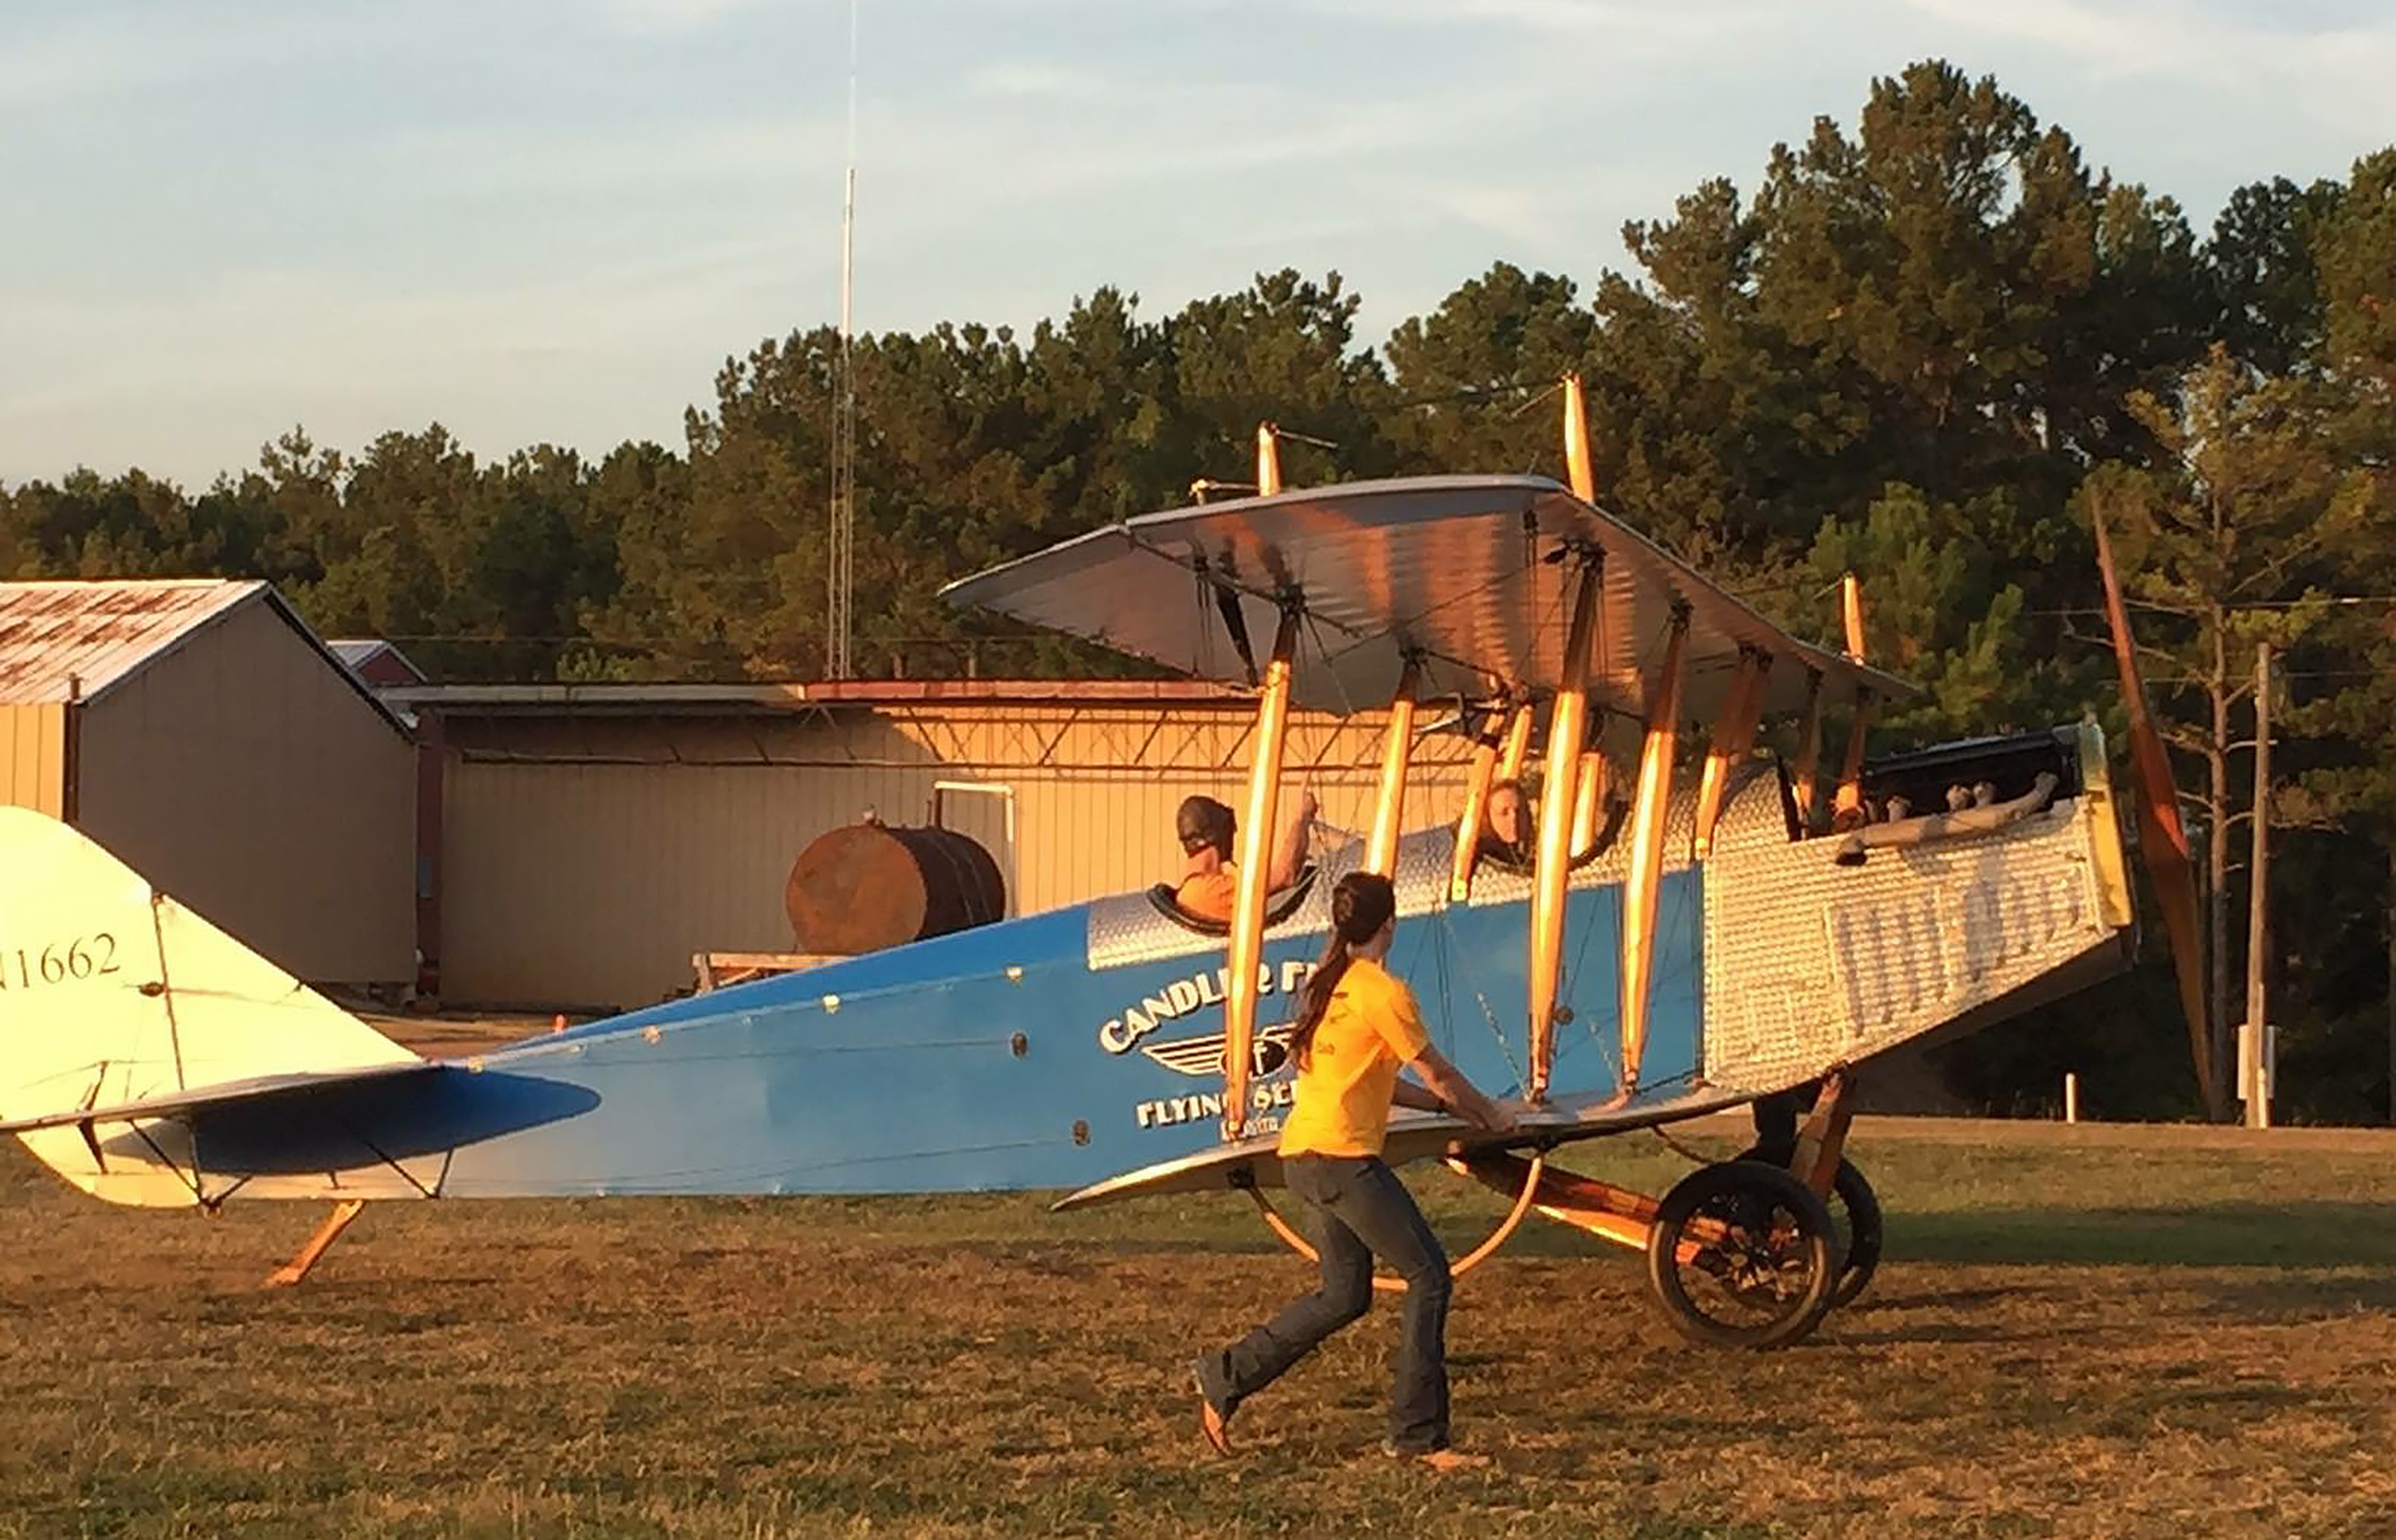 Student pilot Cayla McLeod helps wing walk a Curtiss JN-4 Jenny for Ron Alexander at his Peach State Aerodrome in Williamson, Georgia. Photo courtesy of Cayla McLeod.